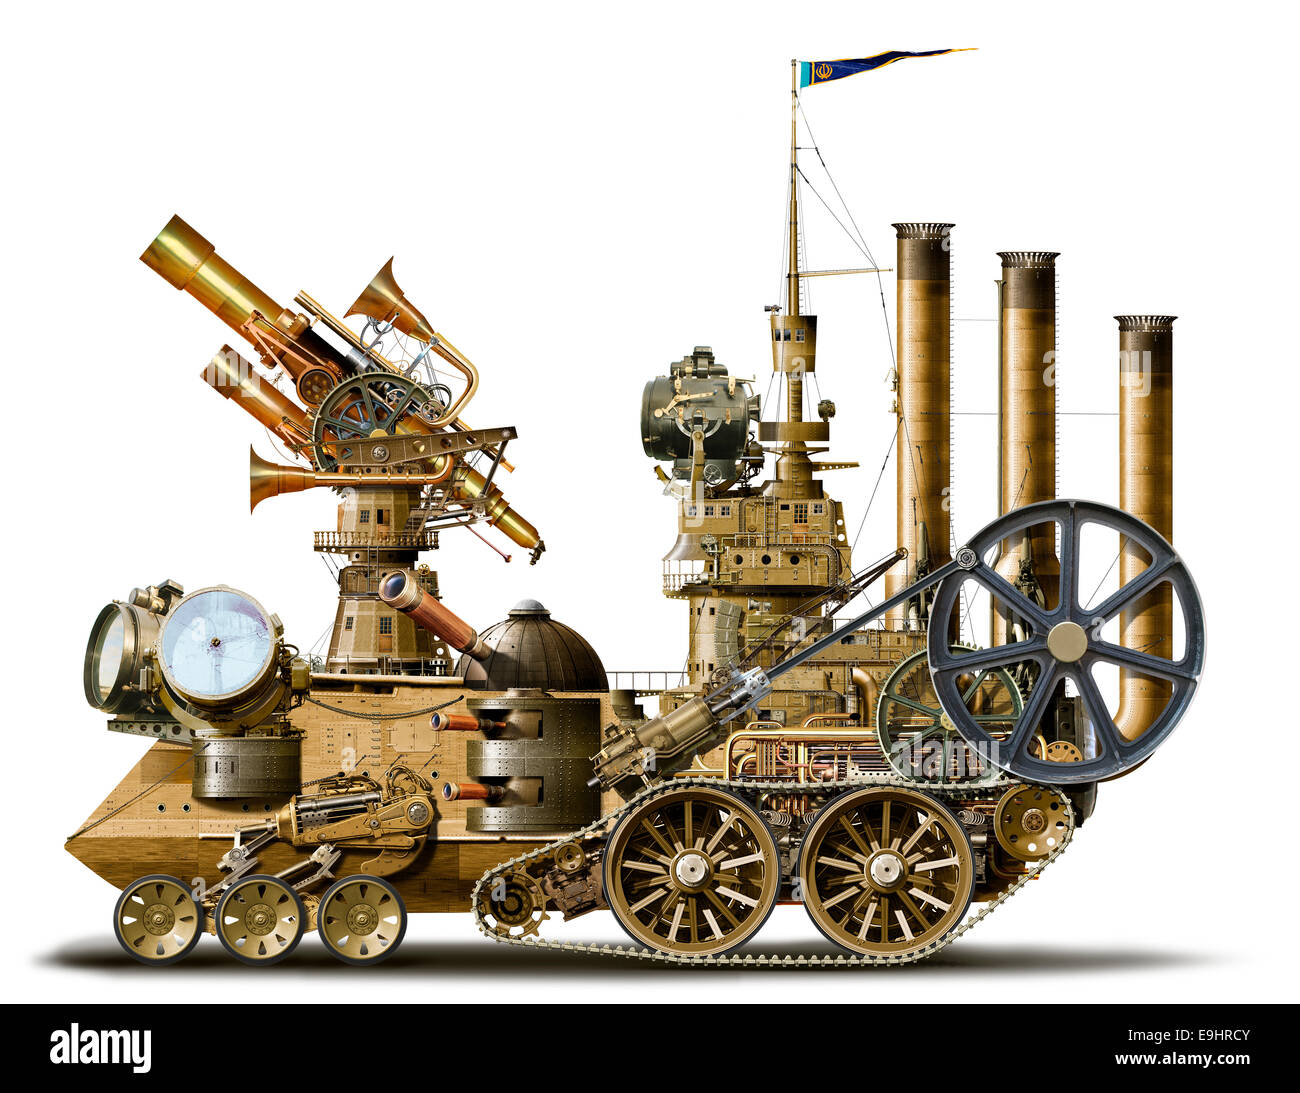 Concept steampunk illustration of a mobile observatory or search engine Stock Photo